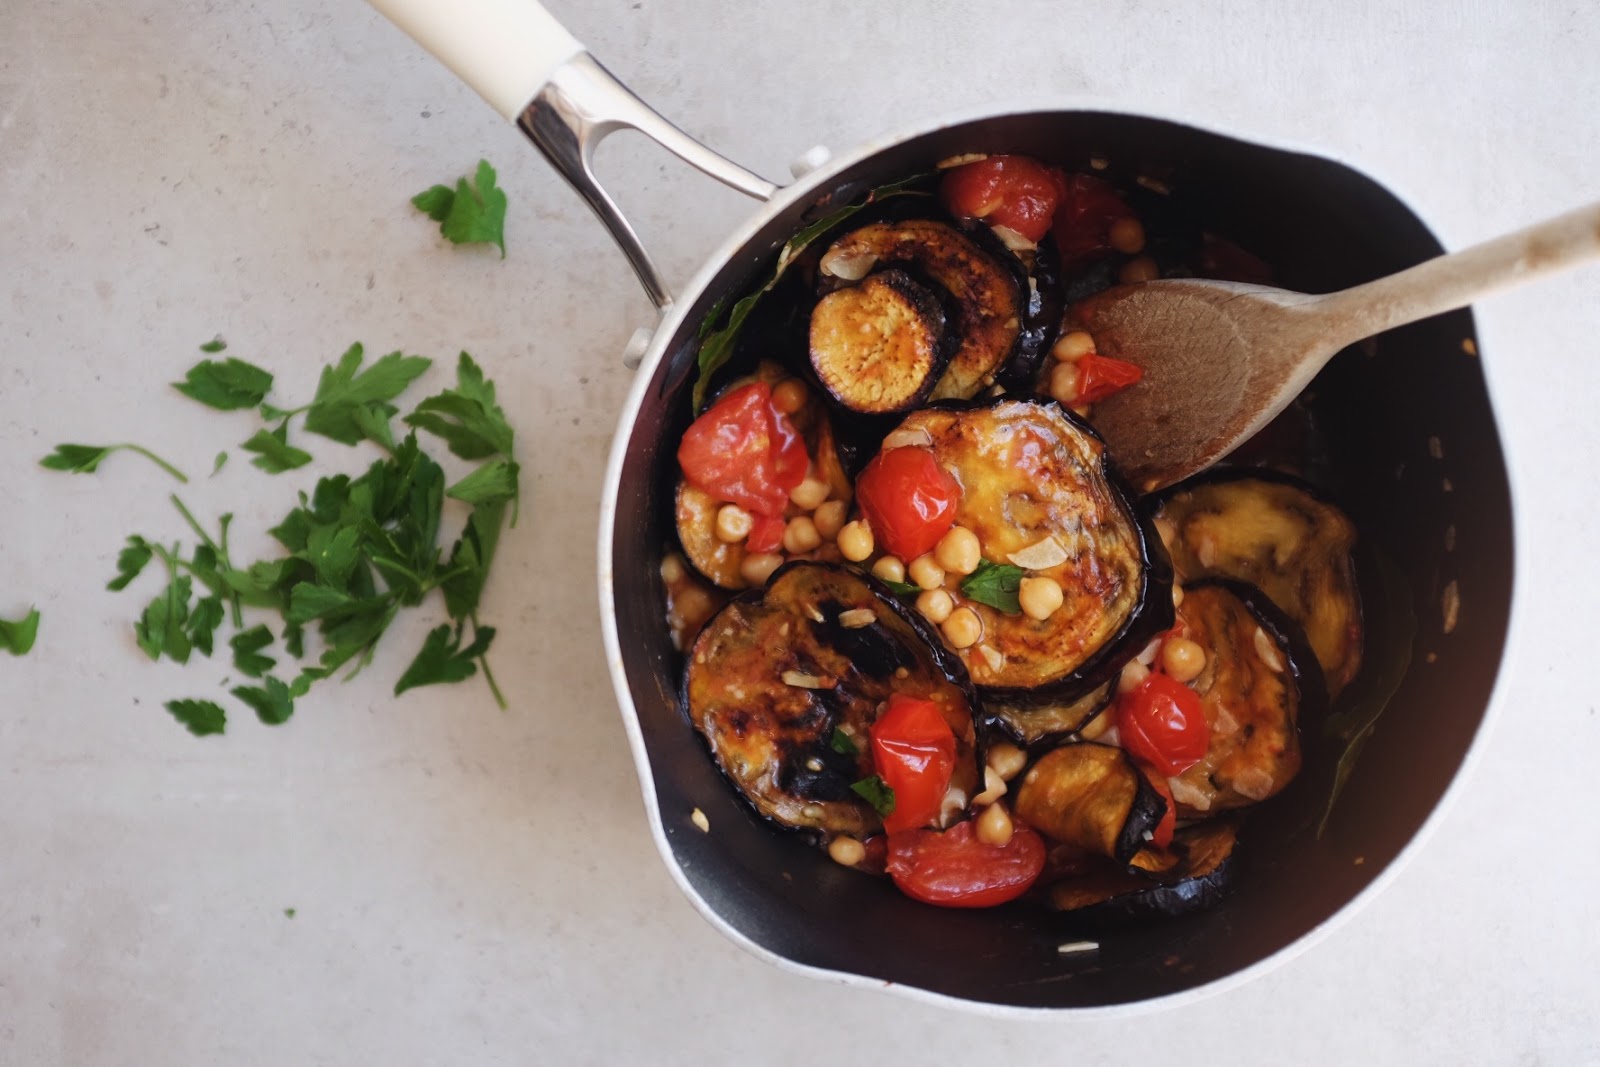 Roasted Eggplant with Chickpeas, Melted Tomatoes and Garlic